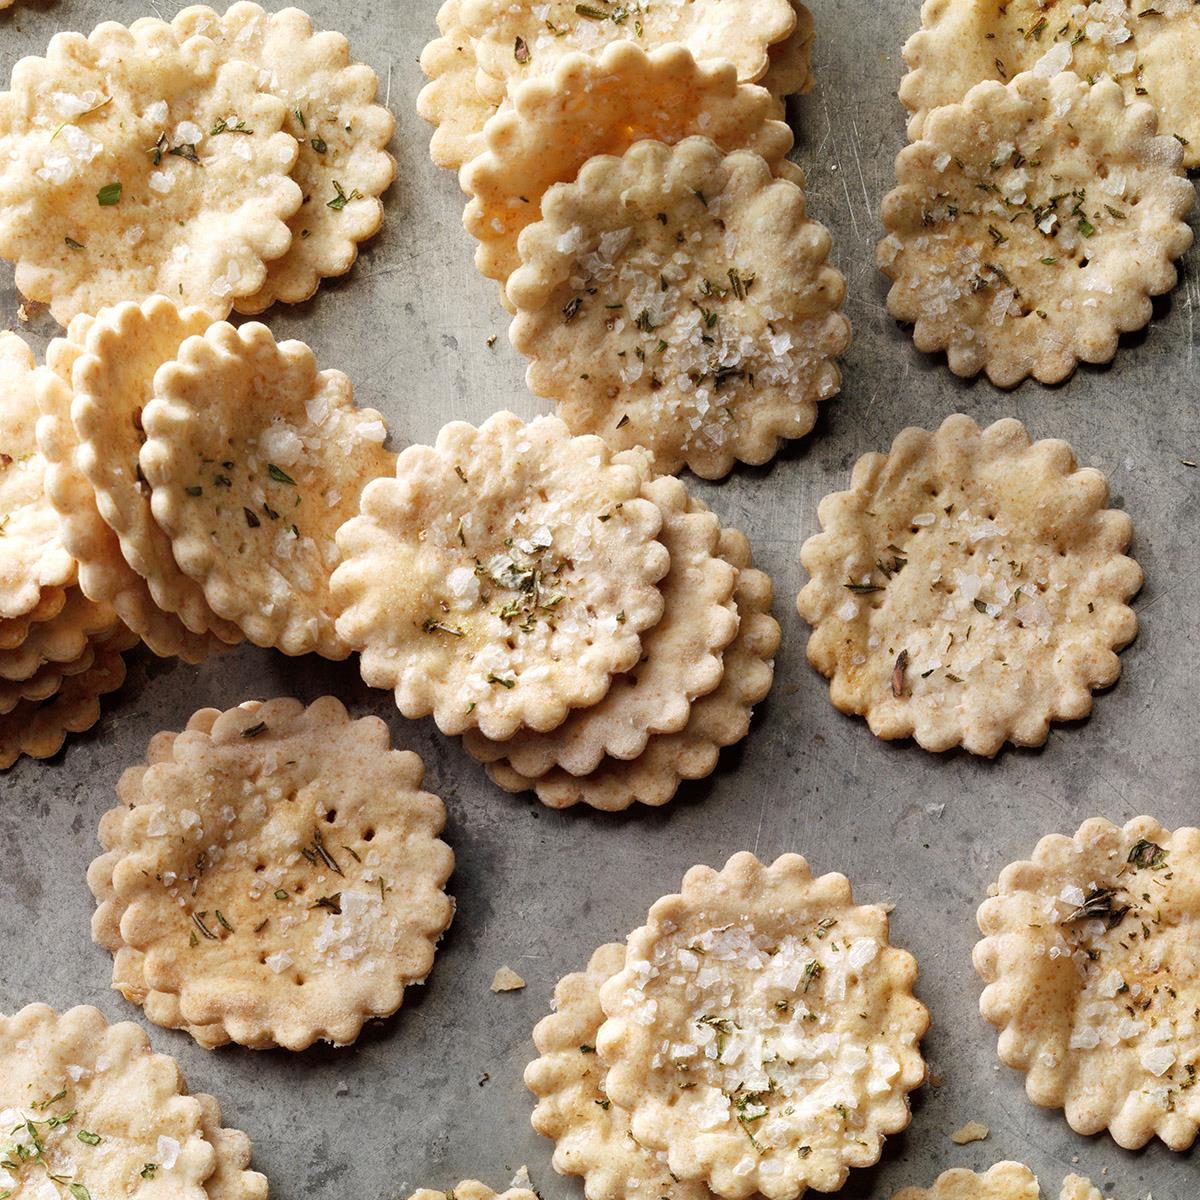 3 Homemade Cracker Recipes for Your Favorite Store-bought Brands